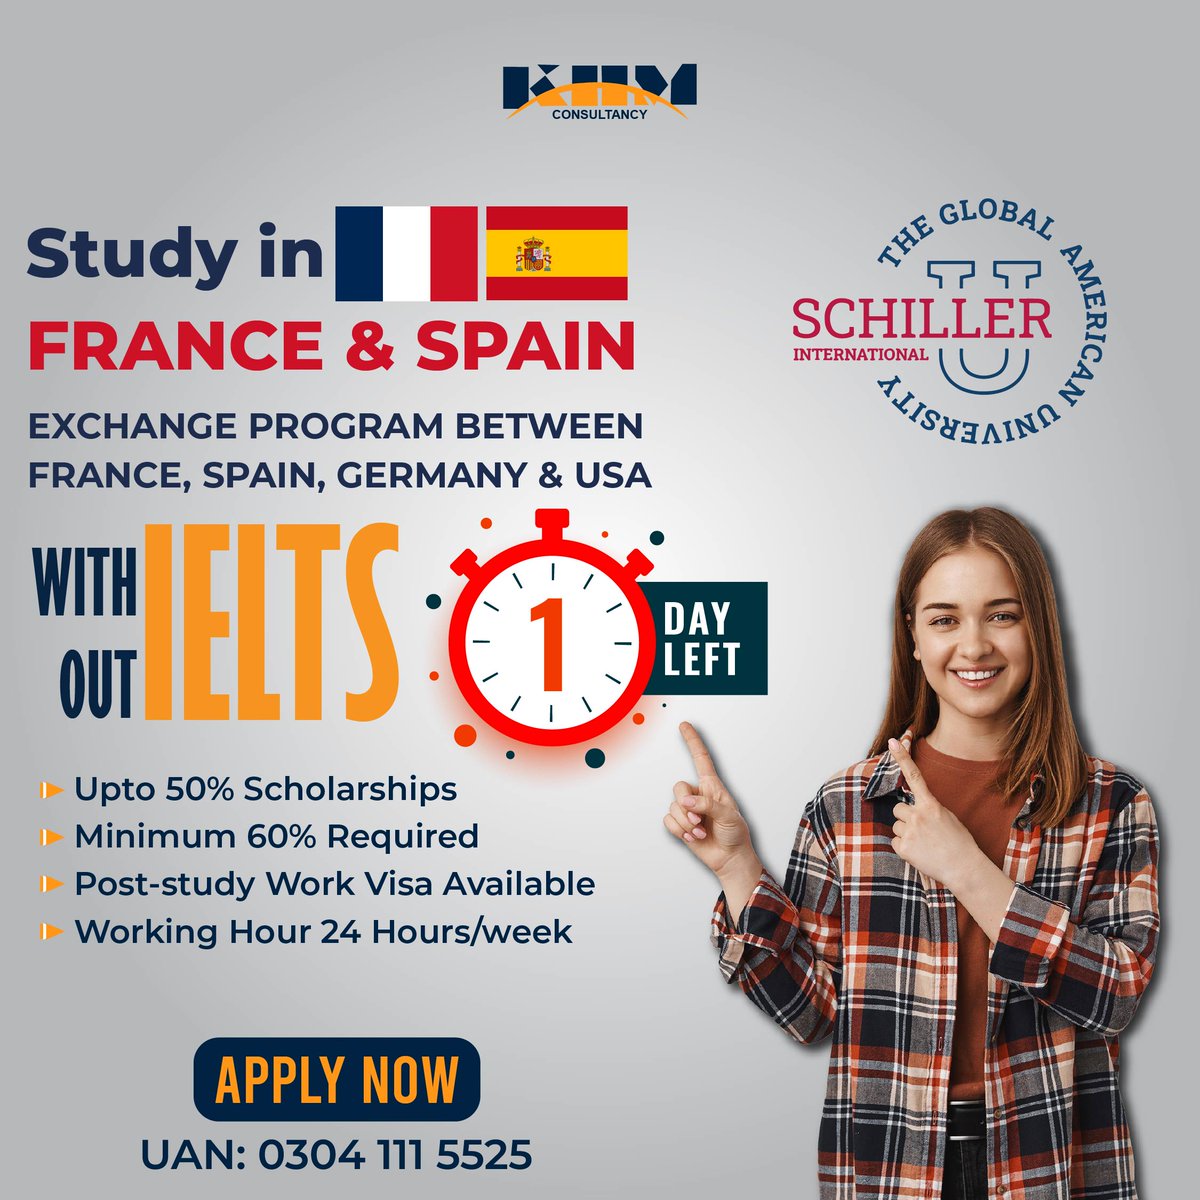 Hurry Up!

1 Day Left!

Study In France, Spain, Germany and USA.

#studyinUSA2024 #studyinFrance #studyinspain #studyinitaly #studyinUK #studyabroadconsultancy #StudyinFrance #studyincanada #studyabroad #studymotivation #Ukvisa